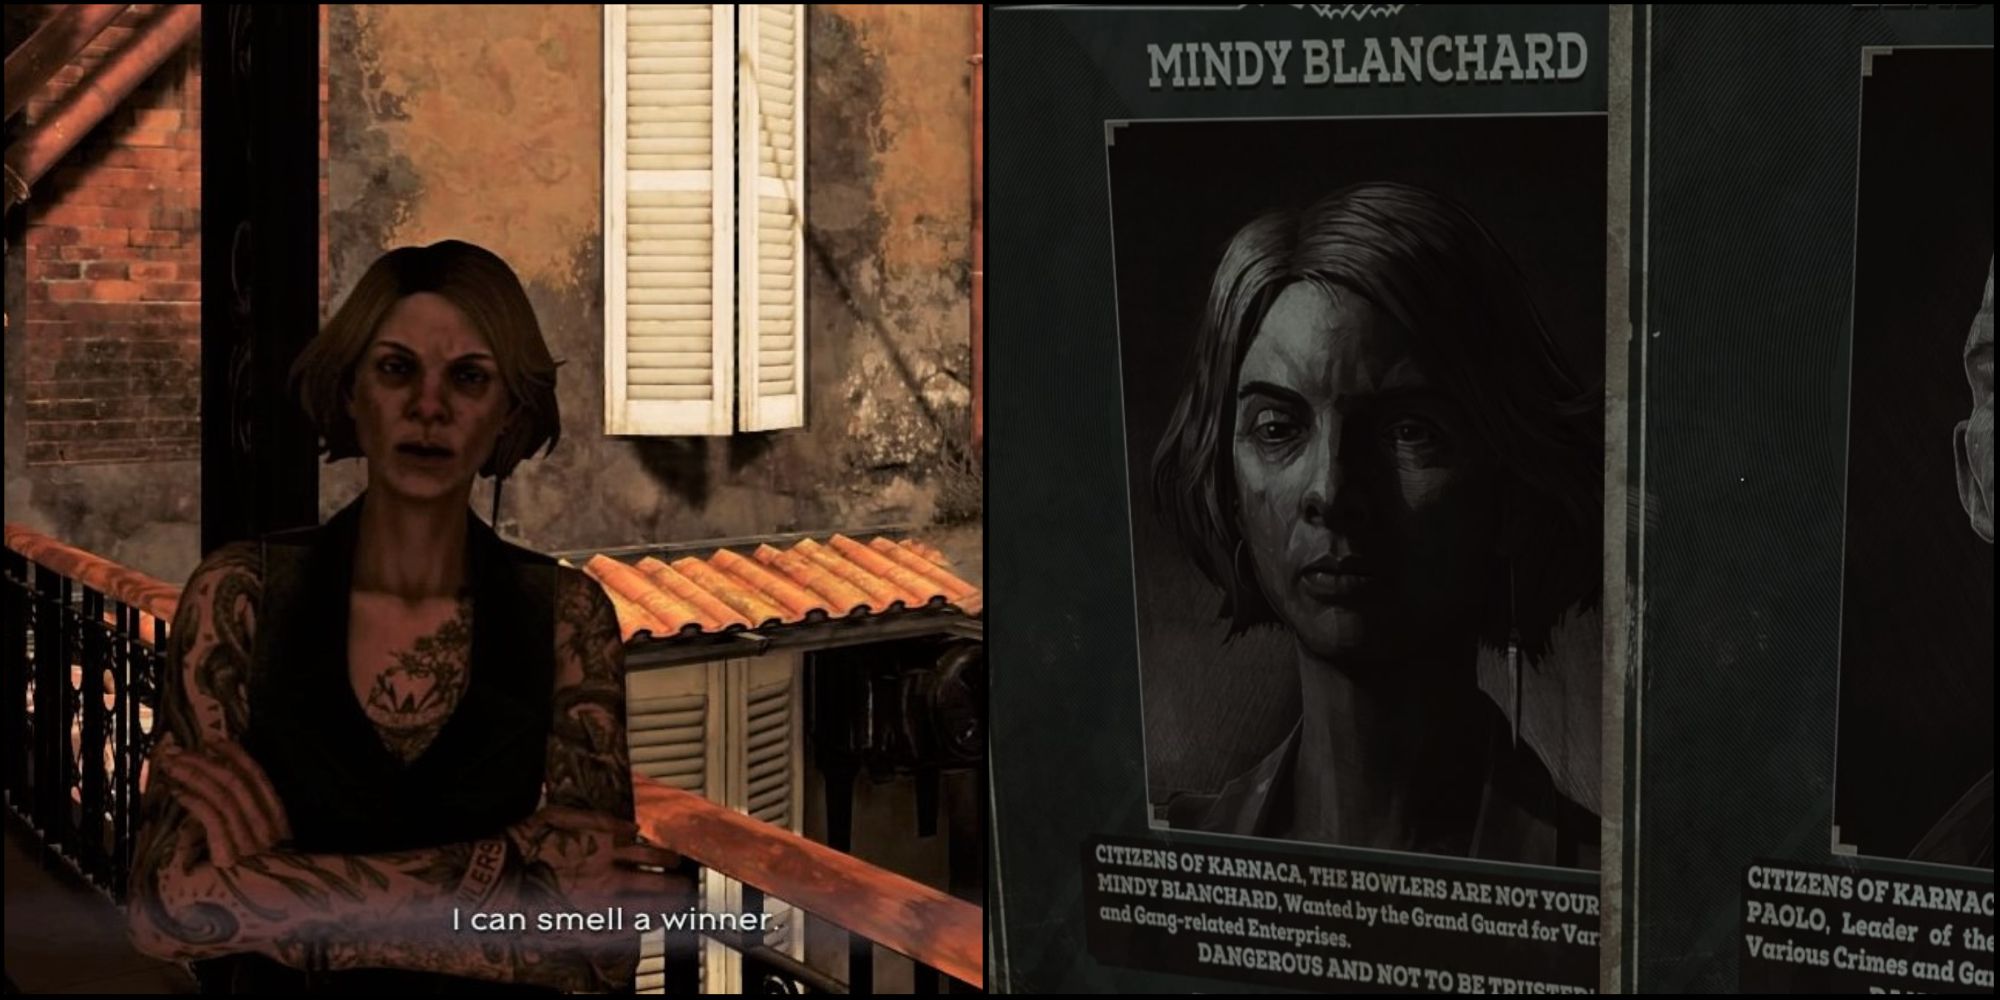 Dishonored-2 -Mindy Blanchard in bar and wanted poster collage